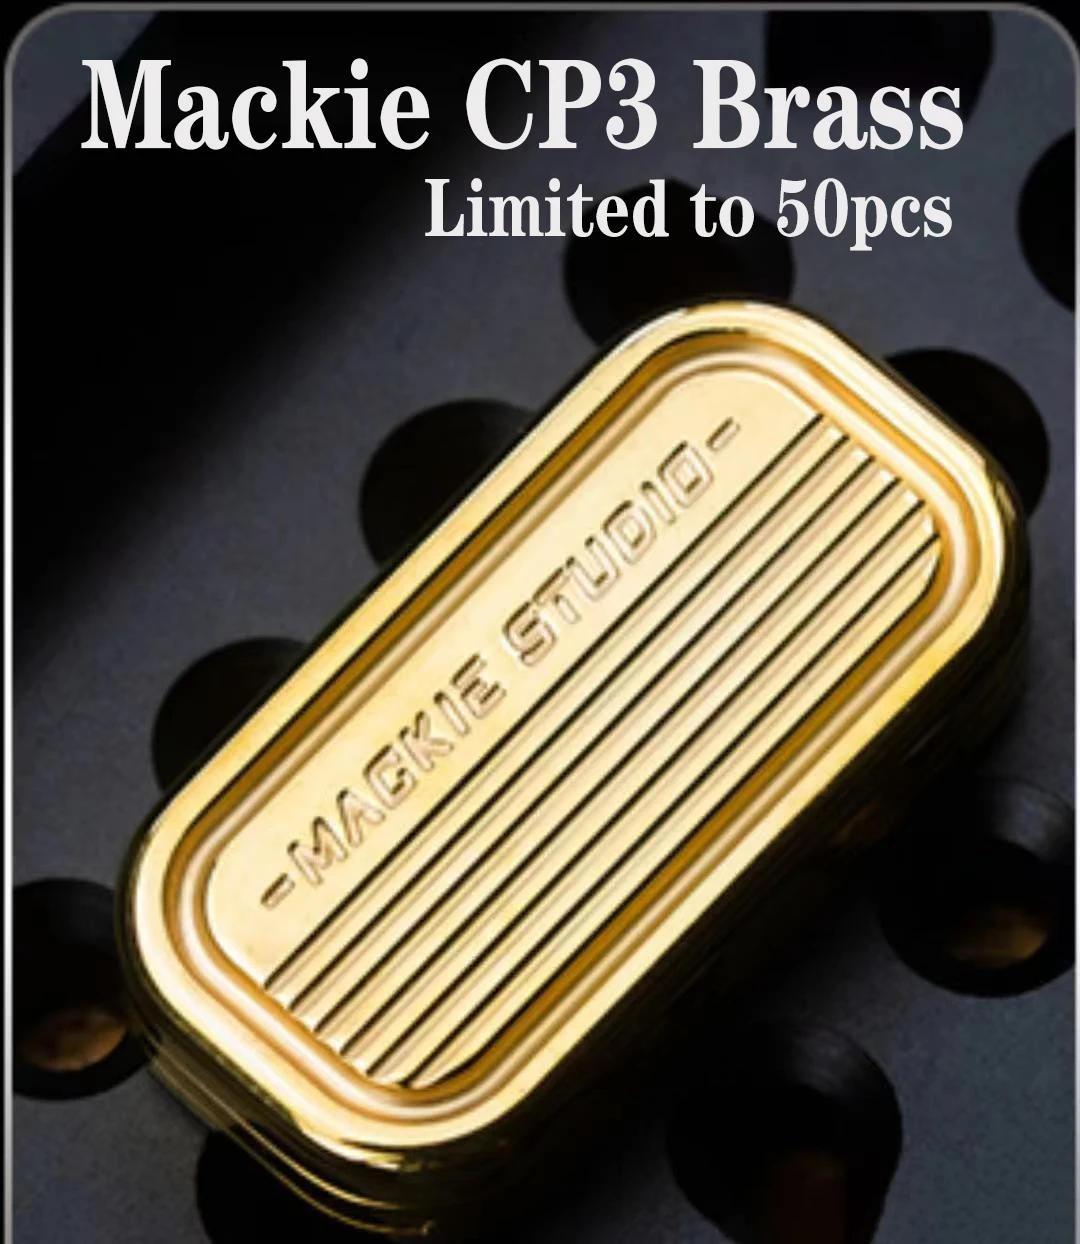 Mackie CP-3 Brass/Copper Push Brand Fingertip Spinning Top PPB Leisure Decompression Toy Limited To 50pcs enlarge